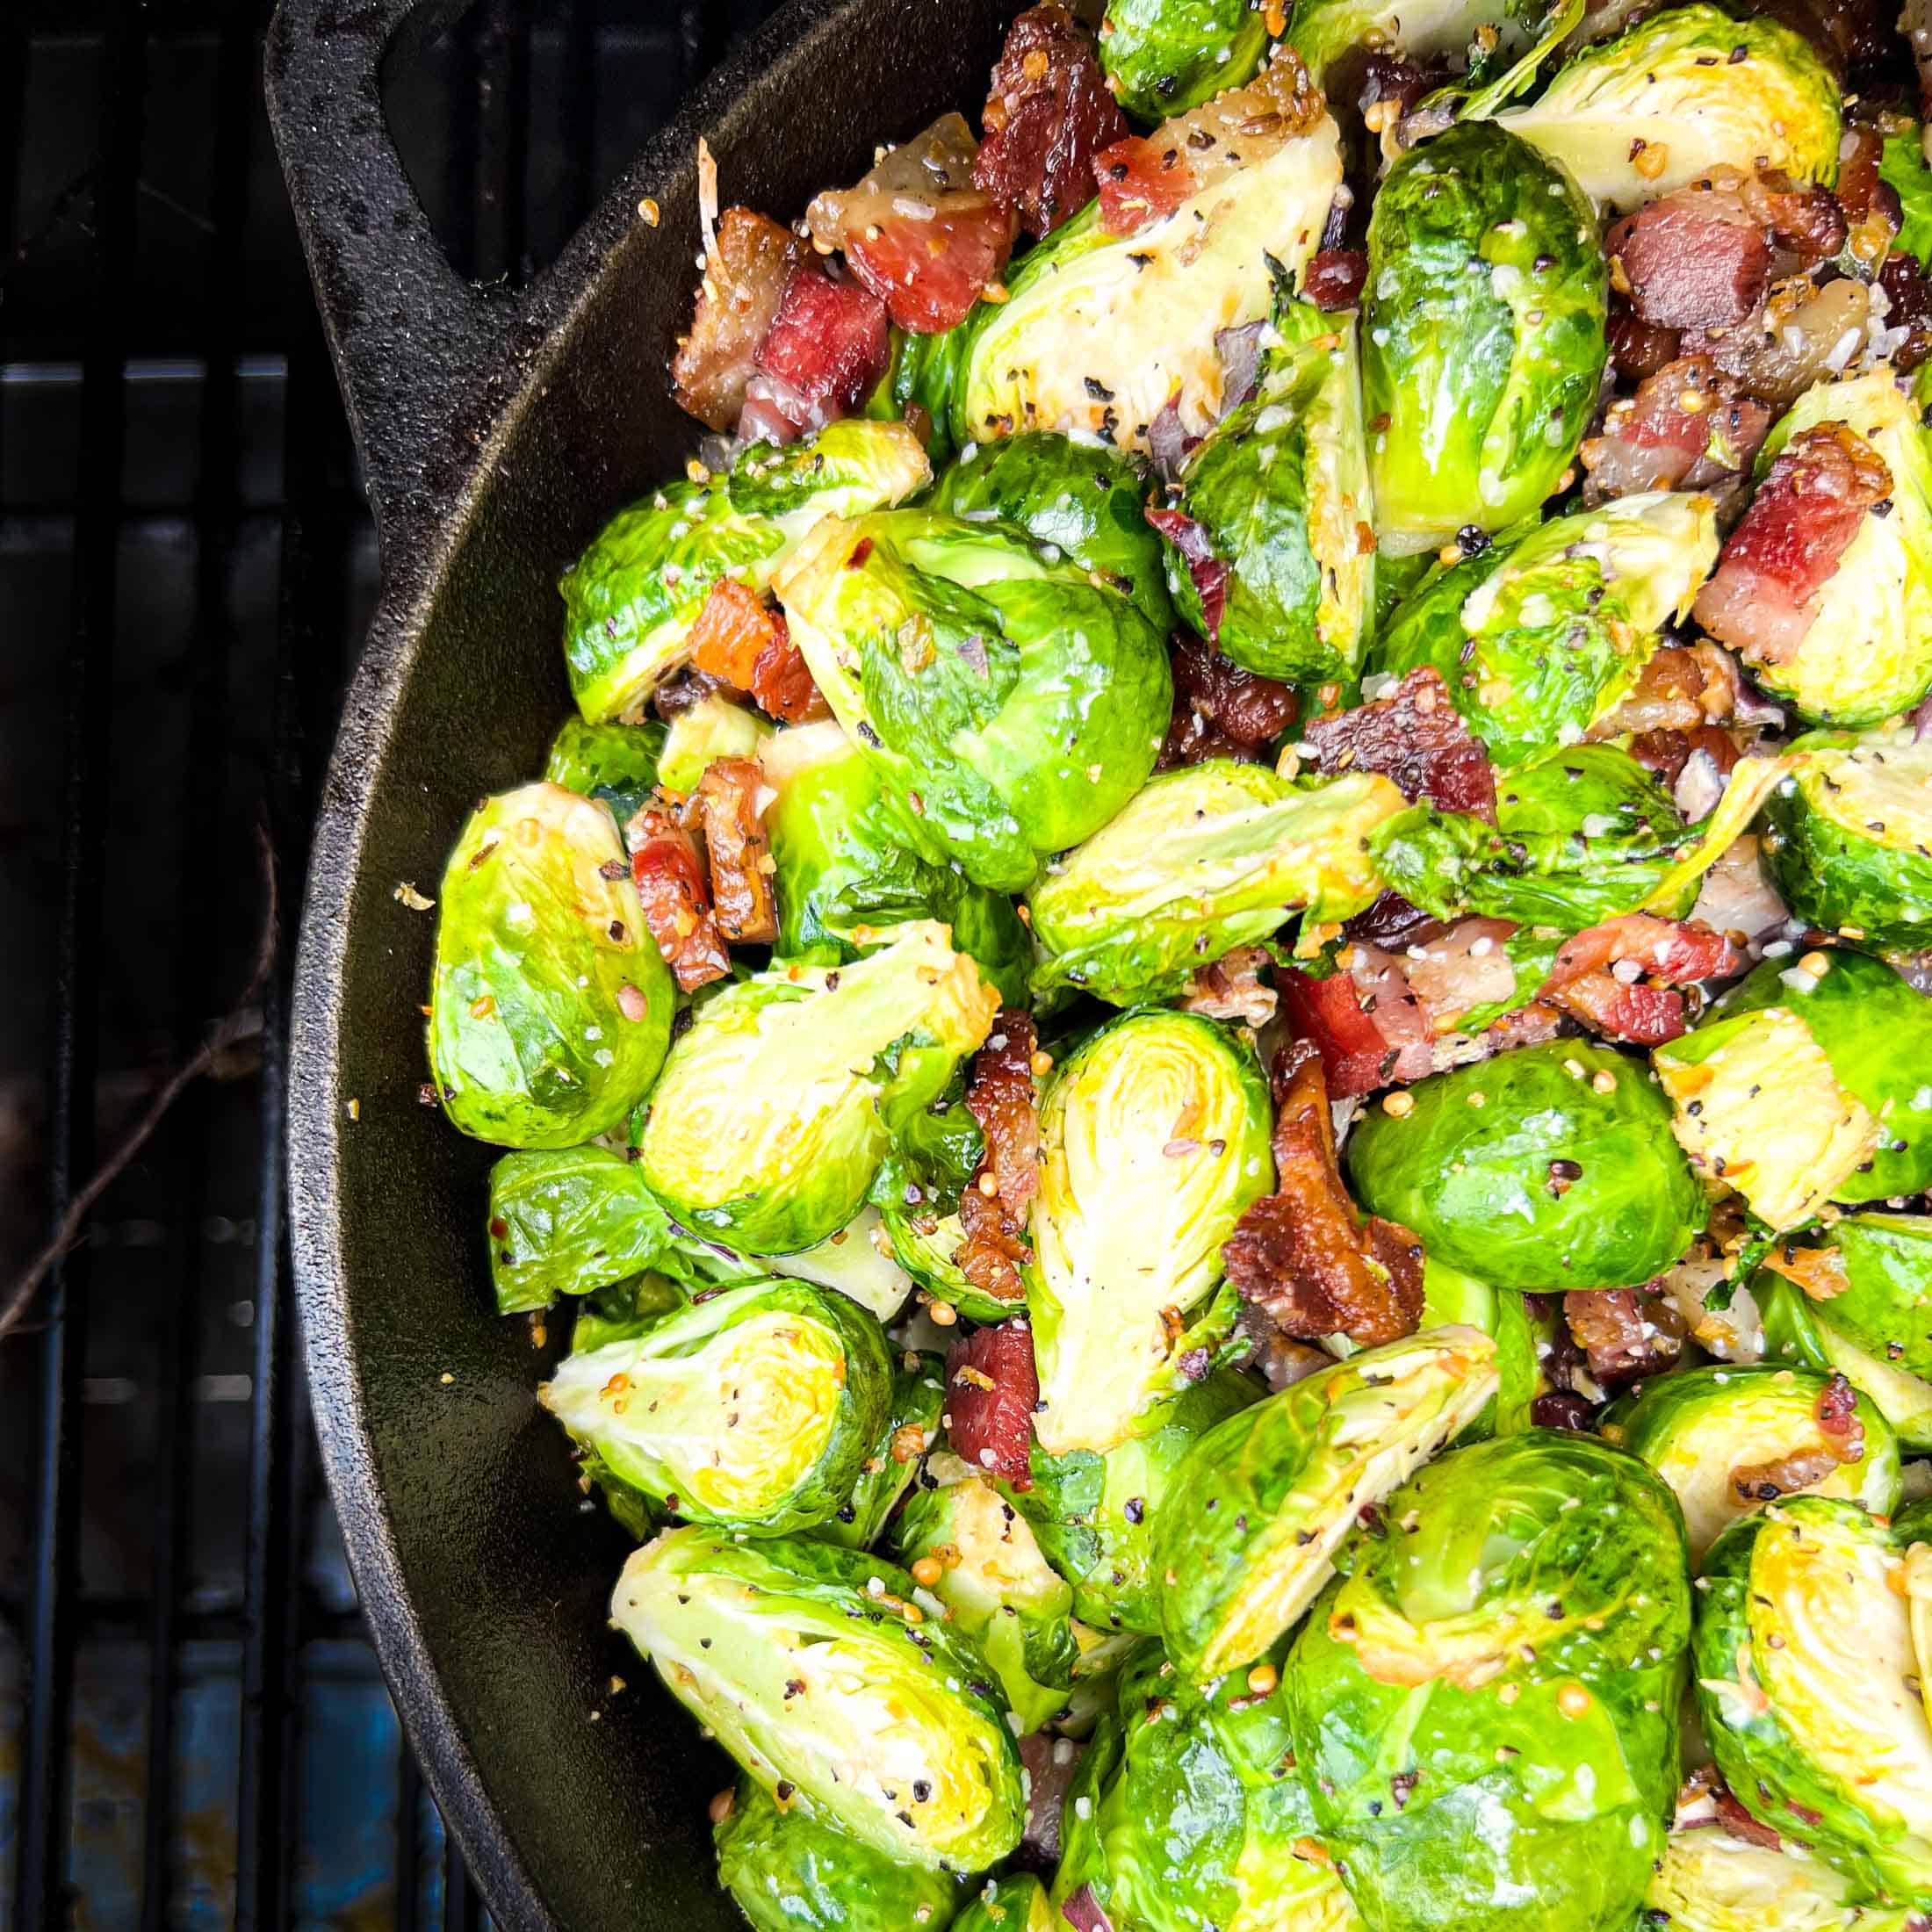 Crispy brussels sprouts in a cast iron skillet on the smoker.